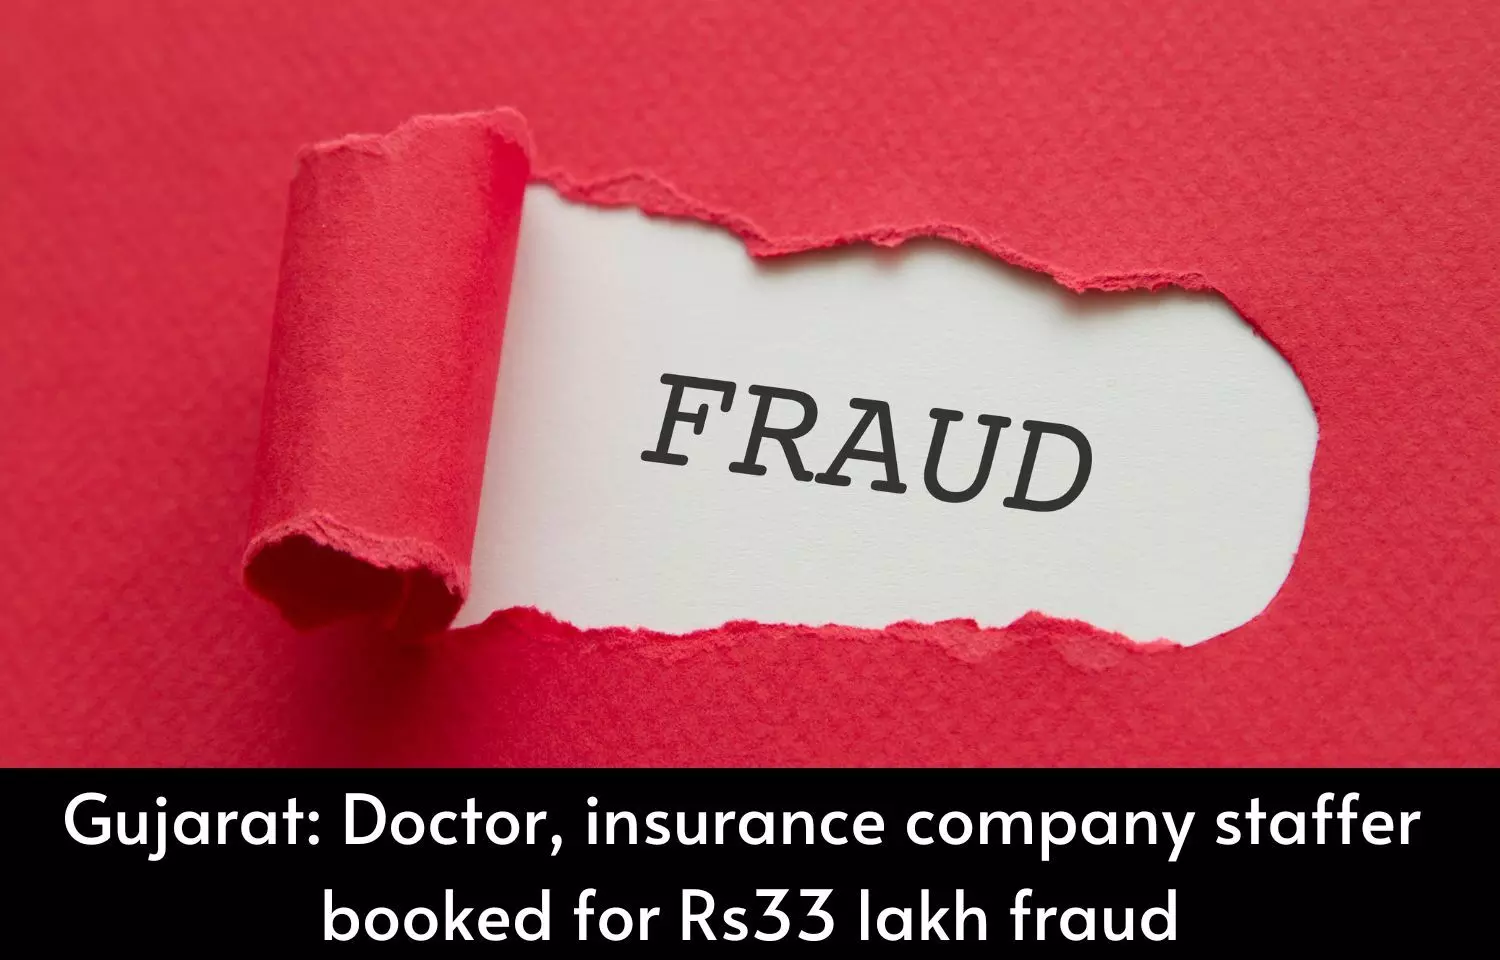 Surat-based doctor, insurance company employee booked for Rs 33 lakh fraud